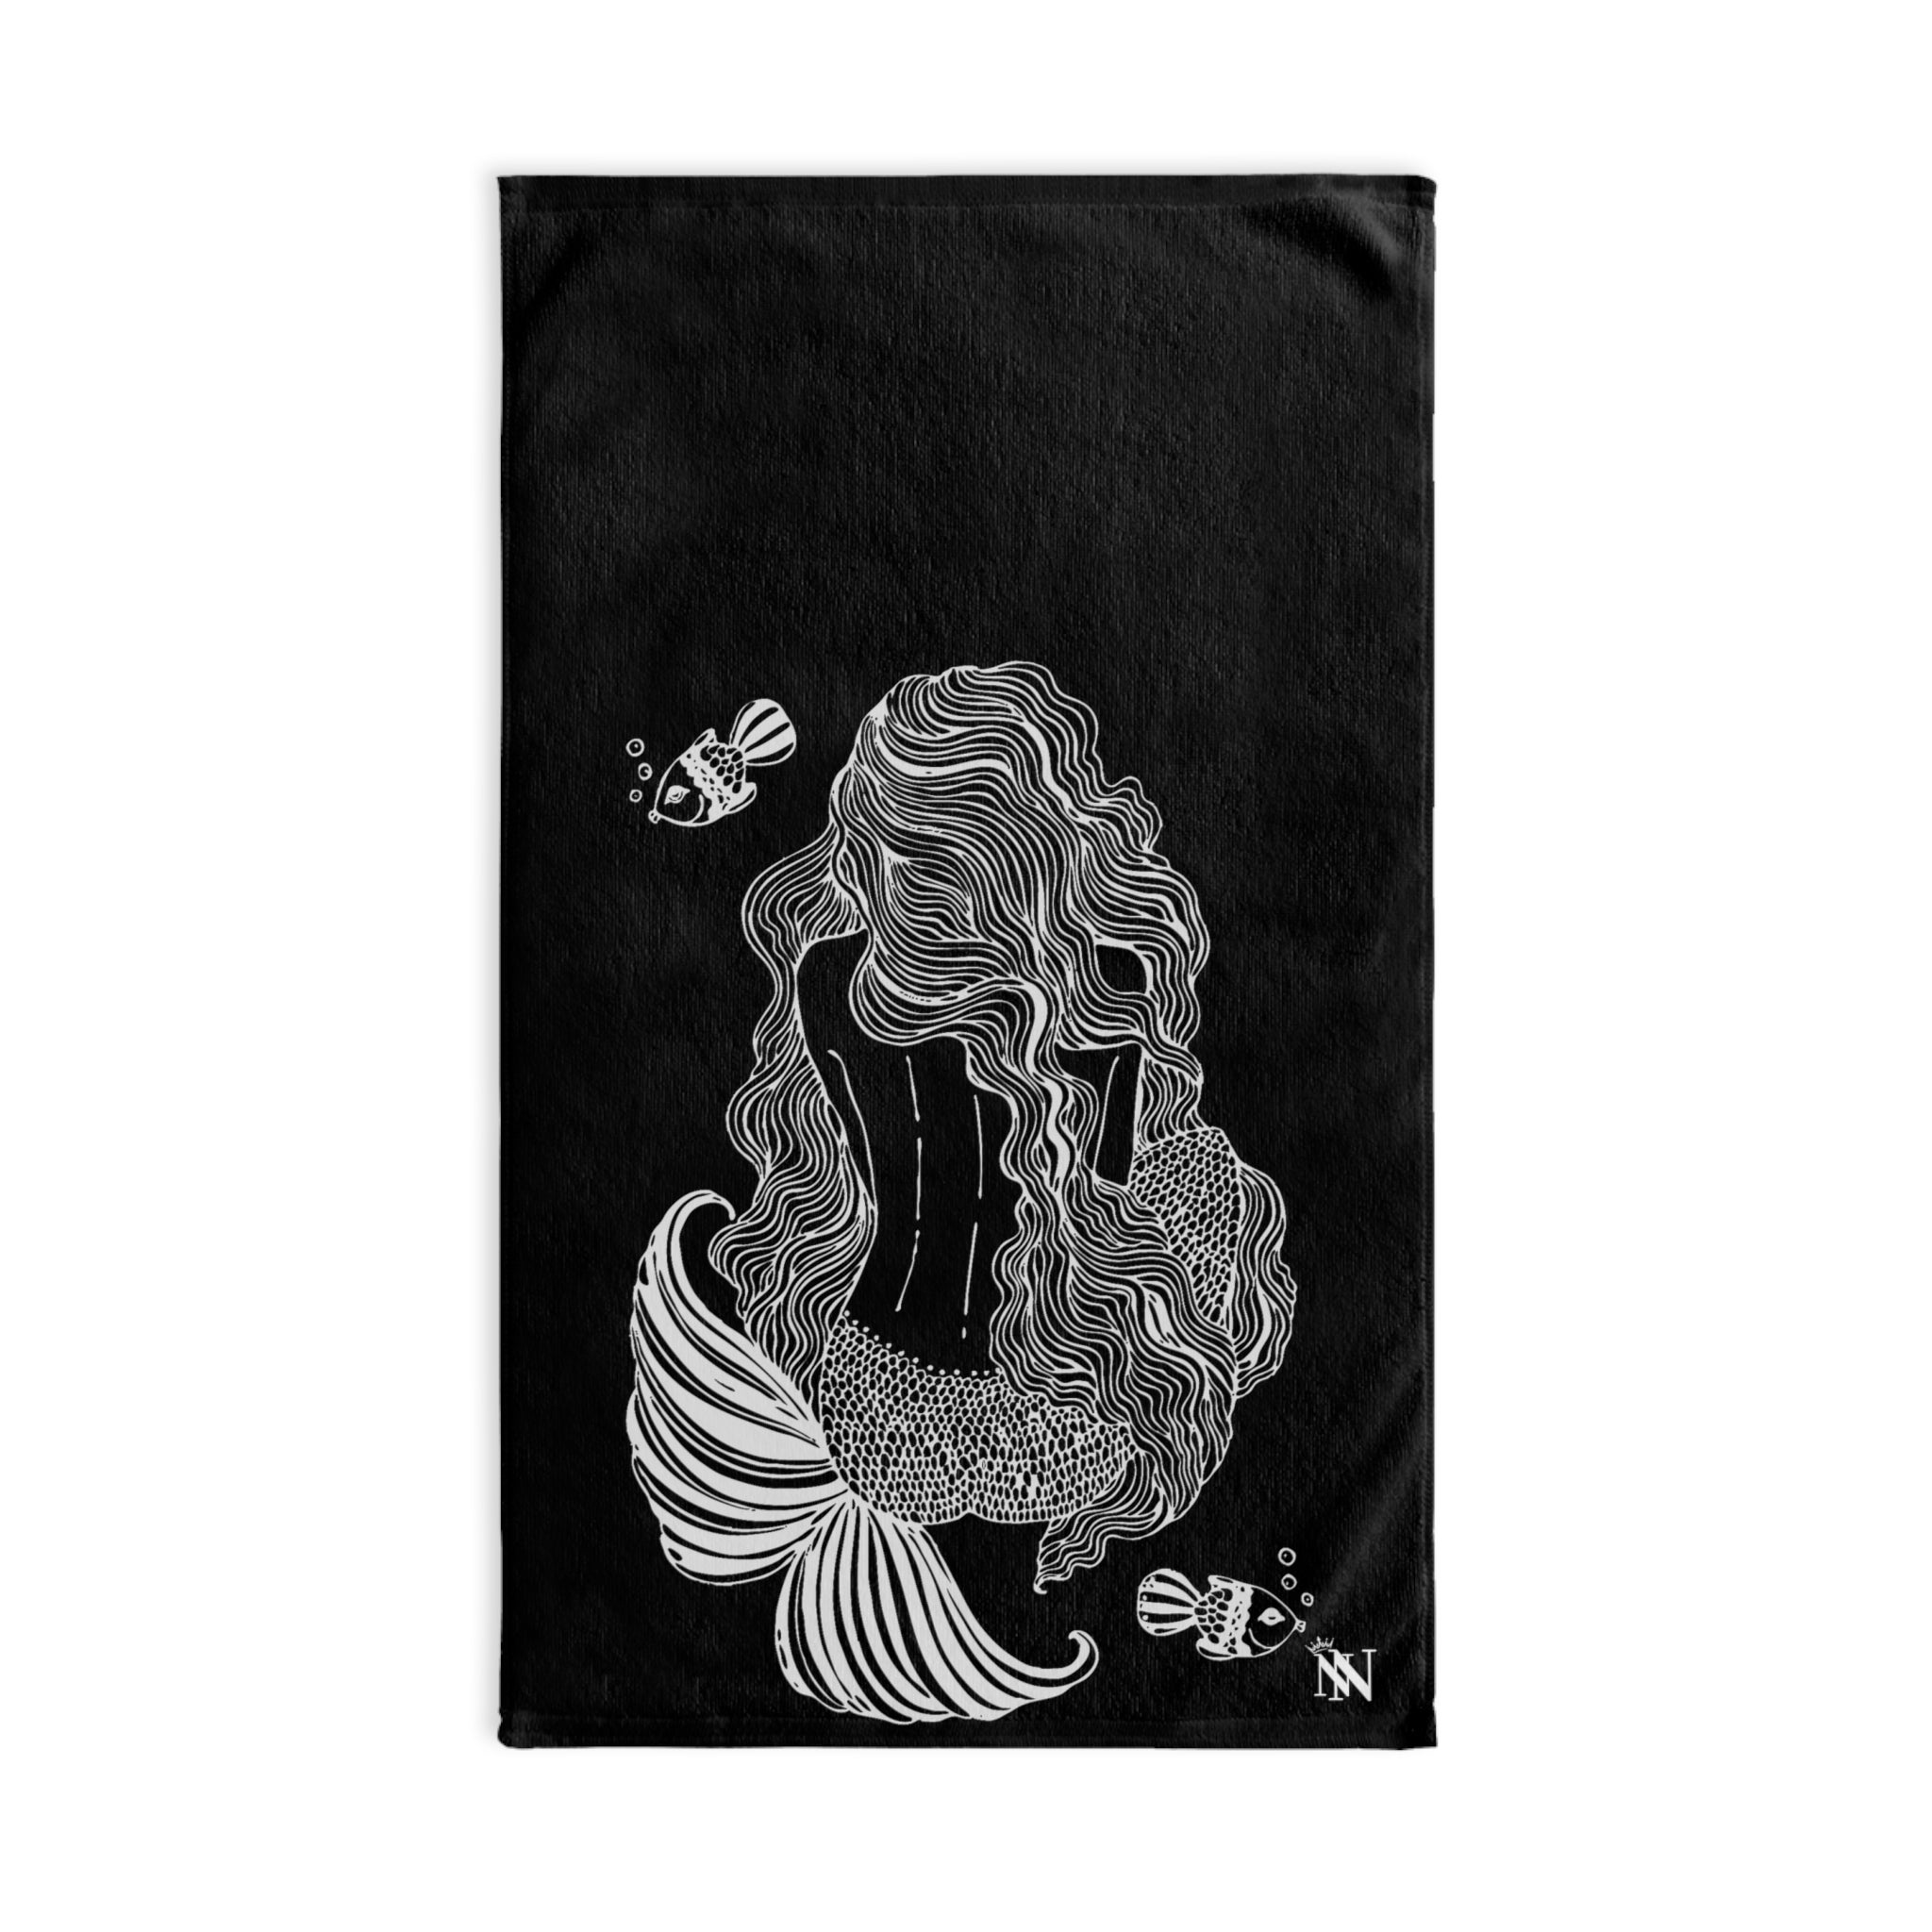 Back Mermaid Sea Black | Sexy Gifts for Boyfriend, Funny Towel Romantic Gift for Wedding Couple Fiance First Year 2nd Anniversary Valentines, Party Gag Gifts, Joke Humor Cloth for Husband Men BF NECTAR NAPKINS